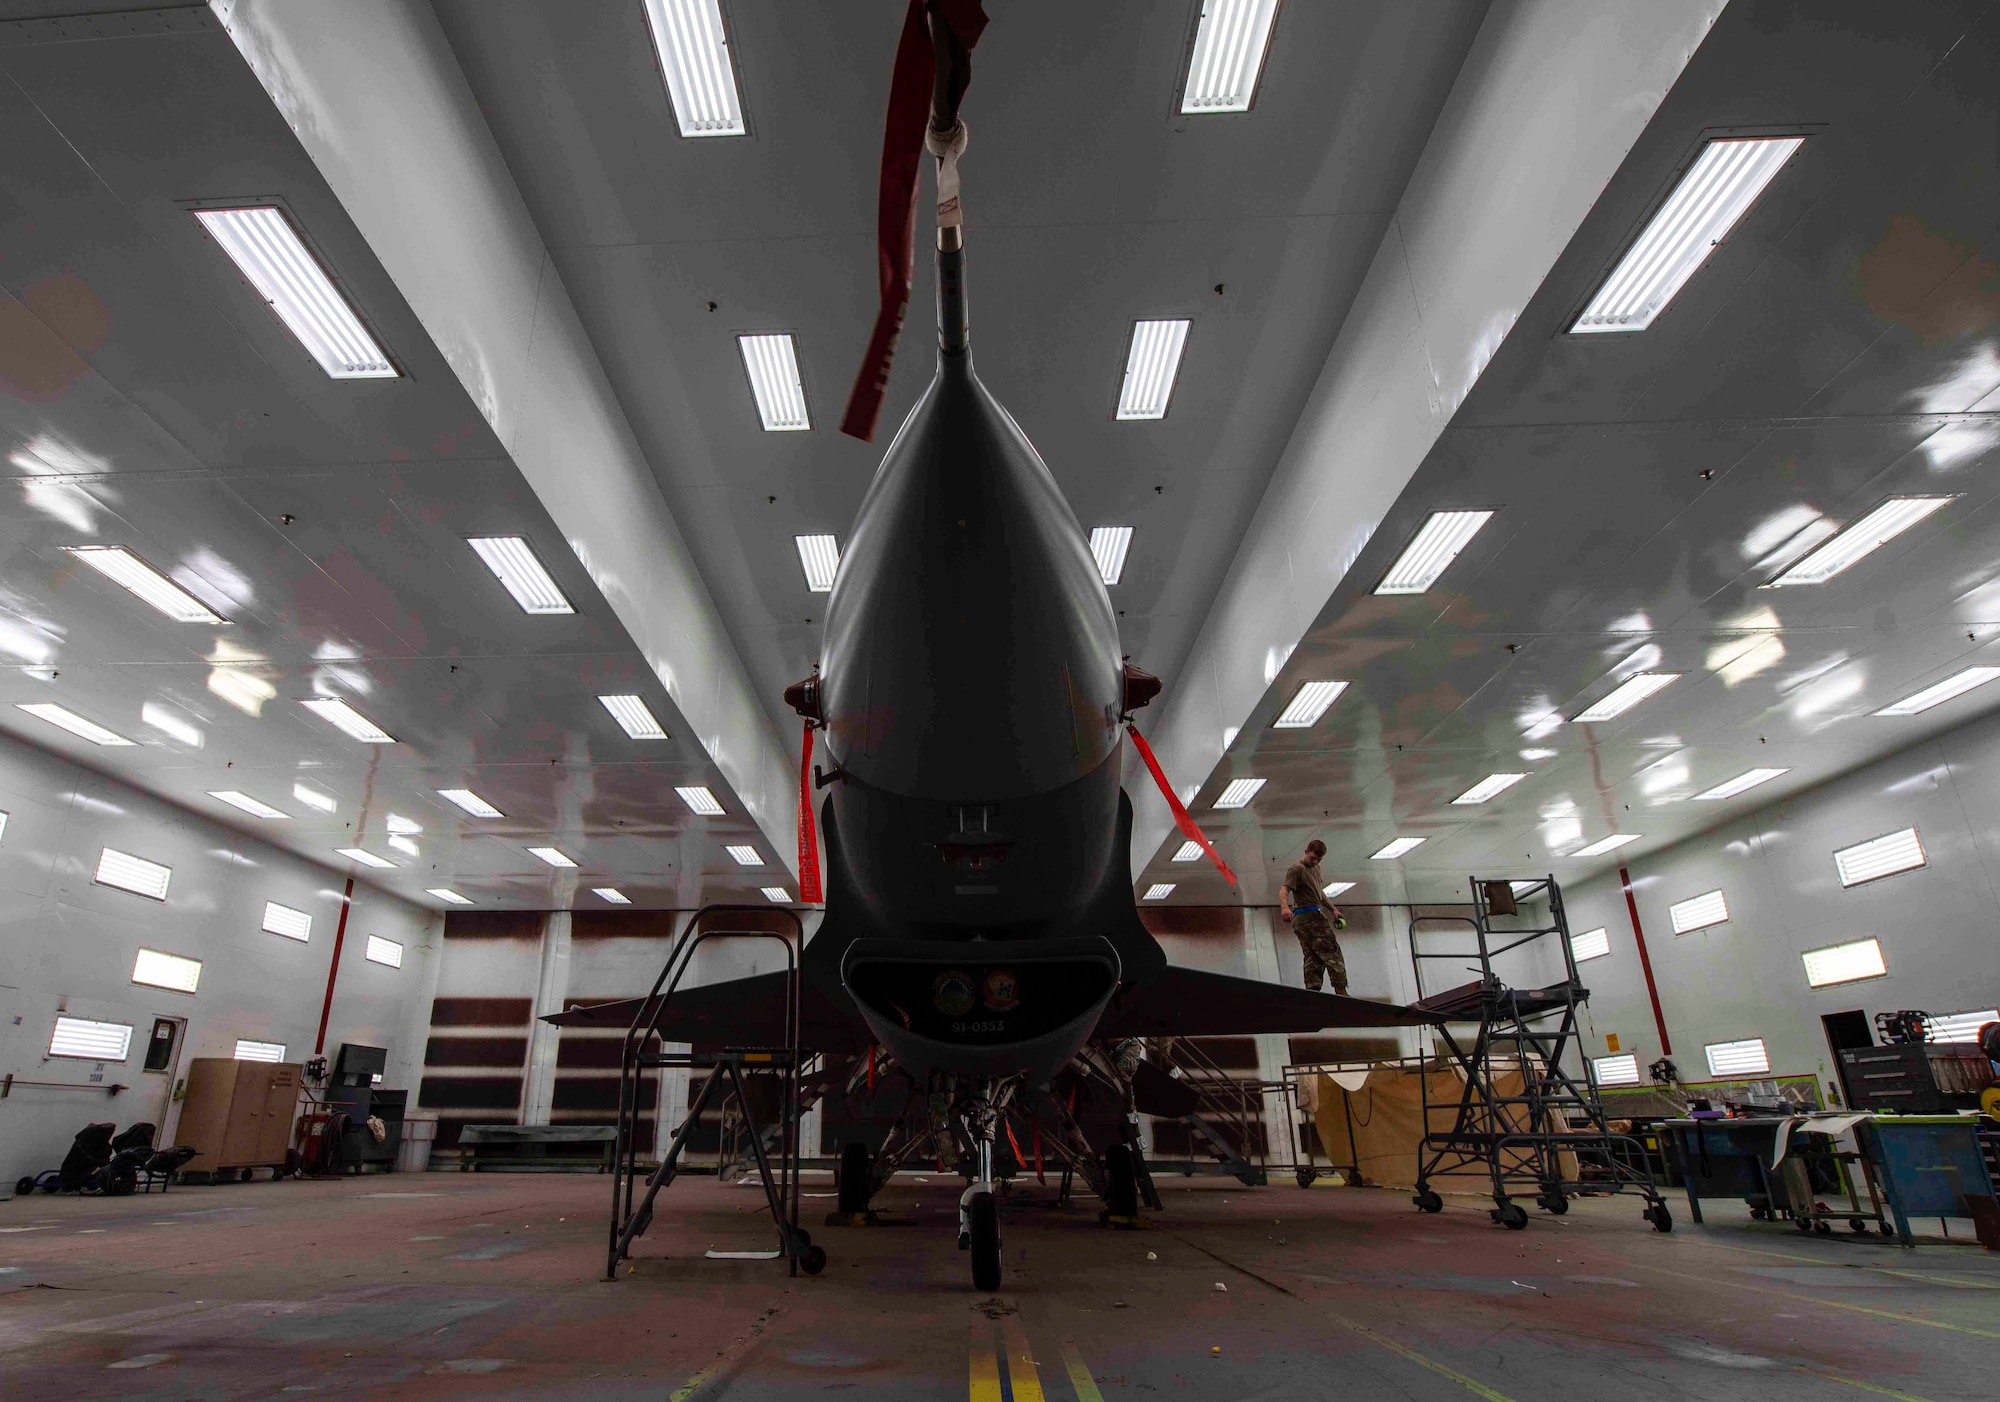 The 77th Fighter Squadron’s F-16CM Viper flagship is parked in the paint shop at the 20th Equipment Maintenance Squadron’s paint booth at Shaw Air Force Base, South Carolina, June 20, 2019.